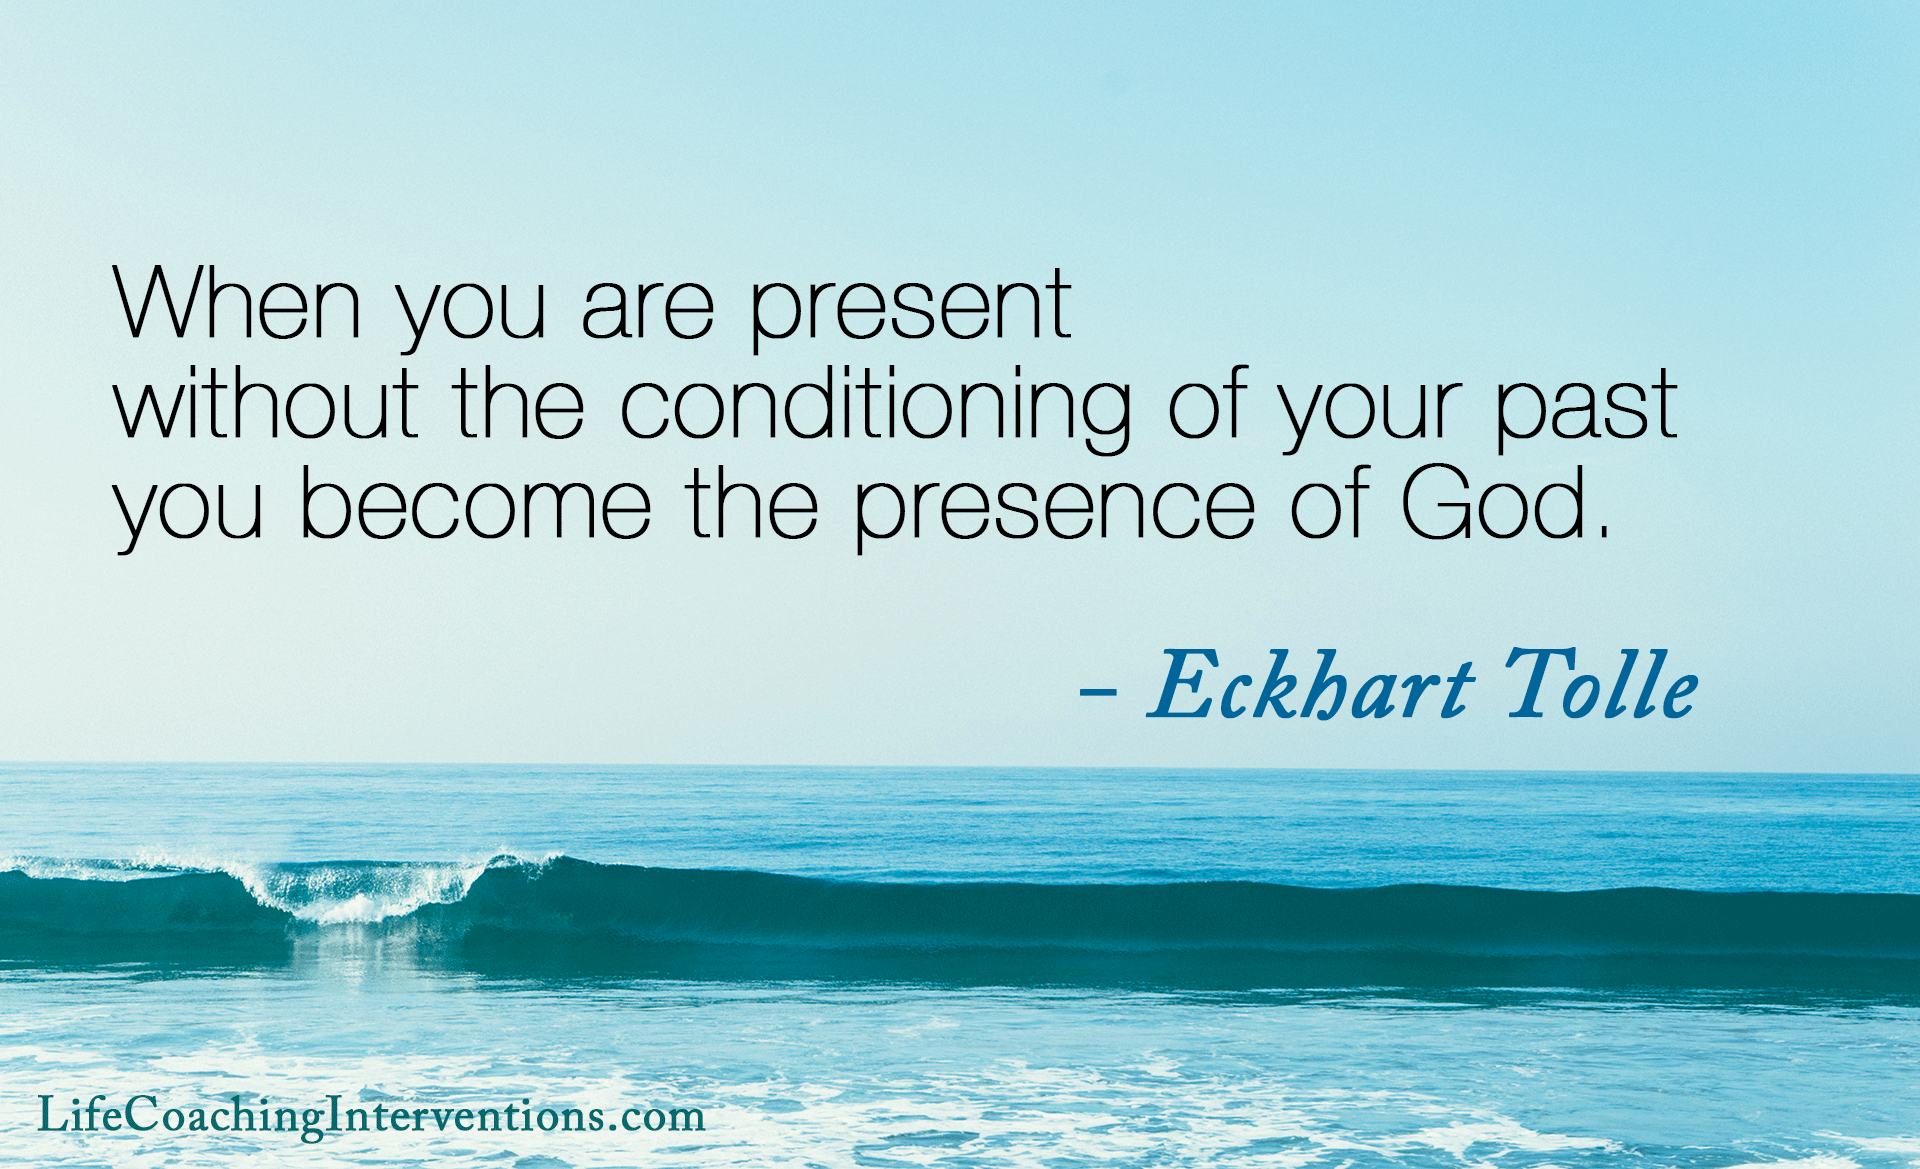 When you are present without the conditioning of your past you become the presence of God. Eckhart Tolle